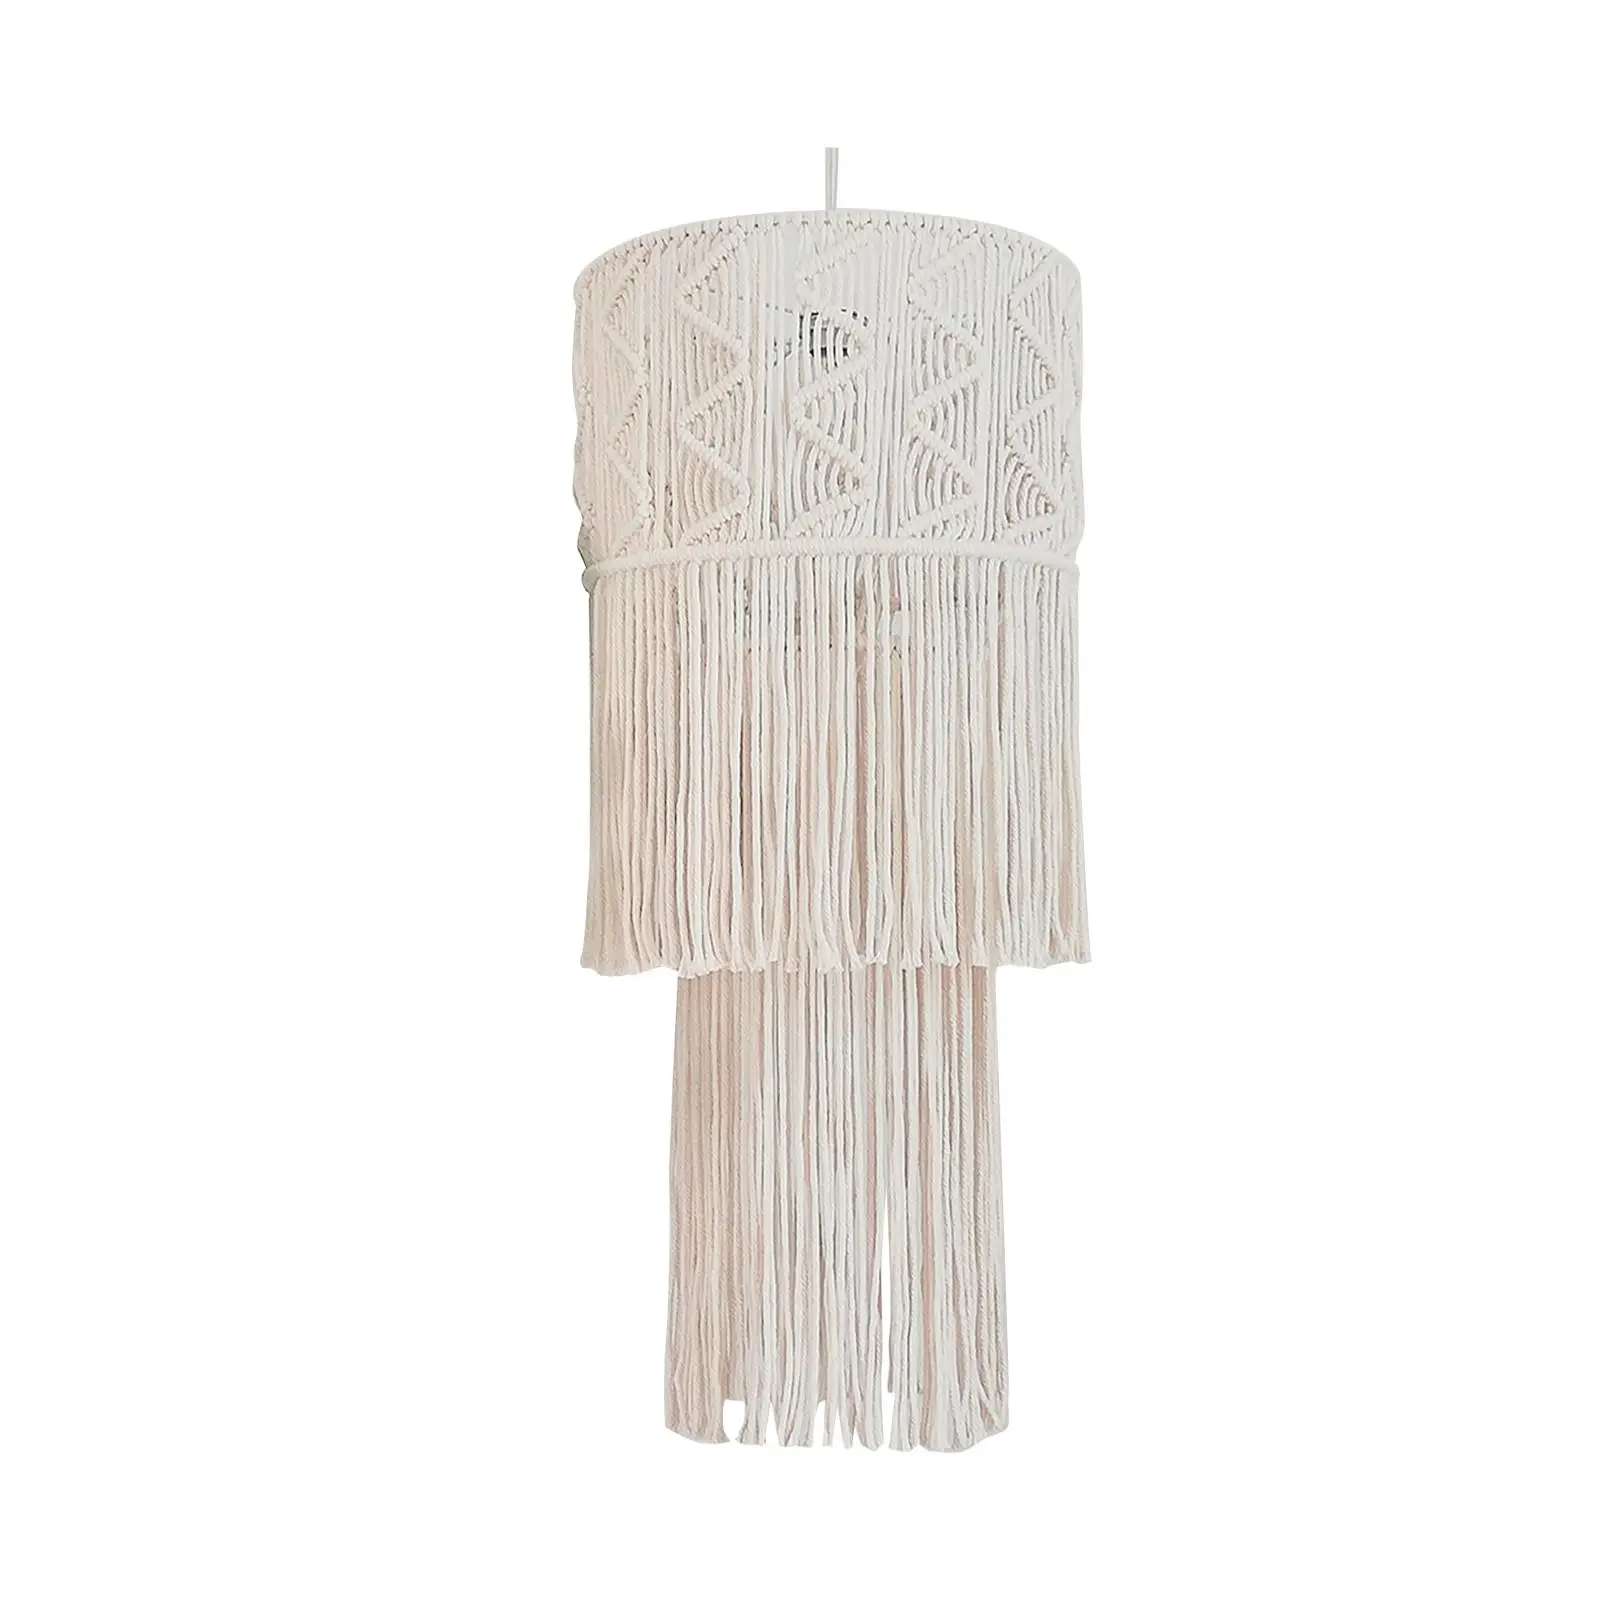 Macrame Lamp Shade Light Cover Boho Hanging Lamp Decoration Light Shade Only Tassel Lampshade for Party Home Wedding Decor